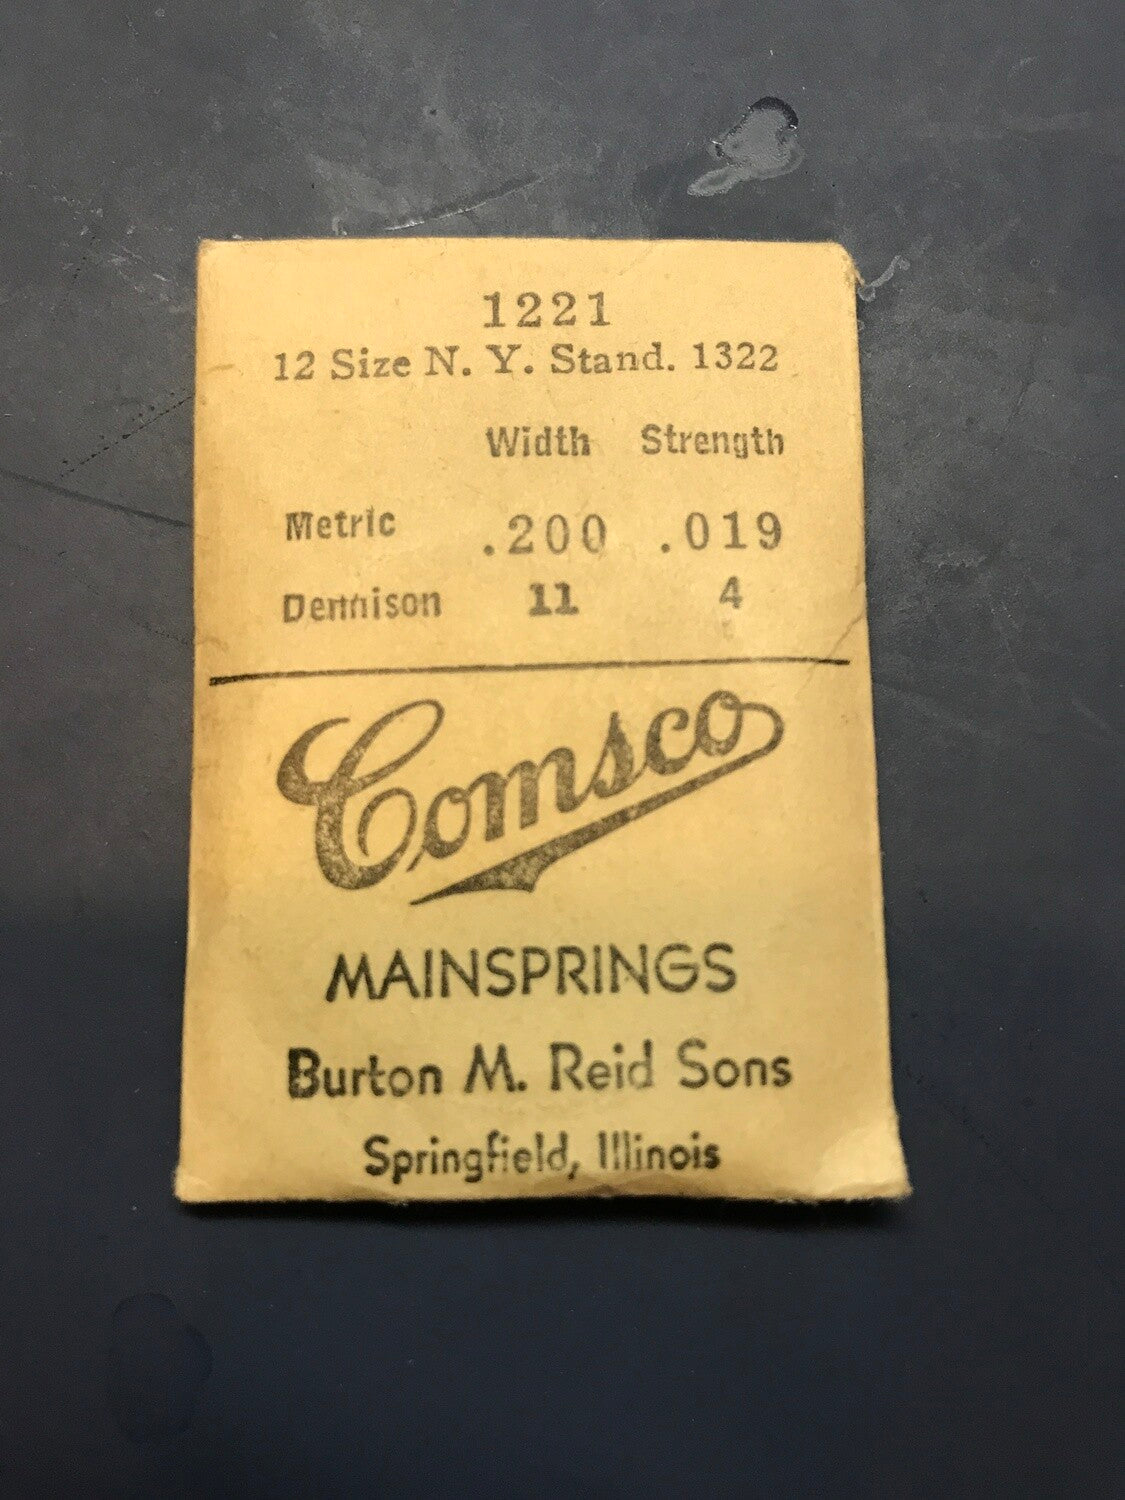 Comsco Mainspring #1221 for 12s N.Y. Standard Factory No. 1322 - Steel